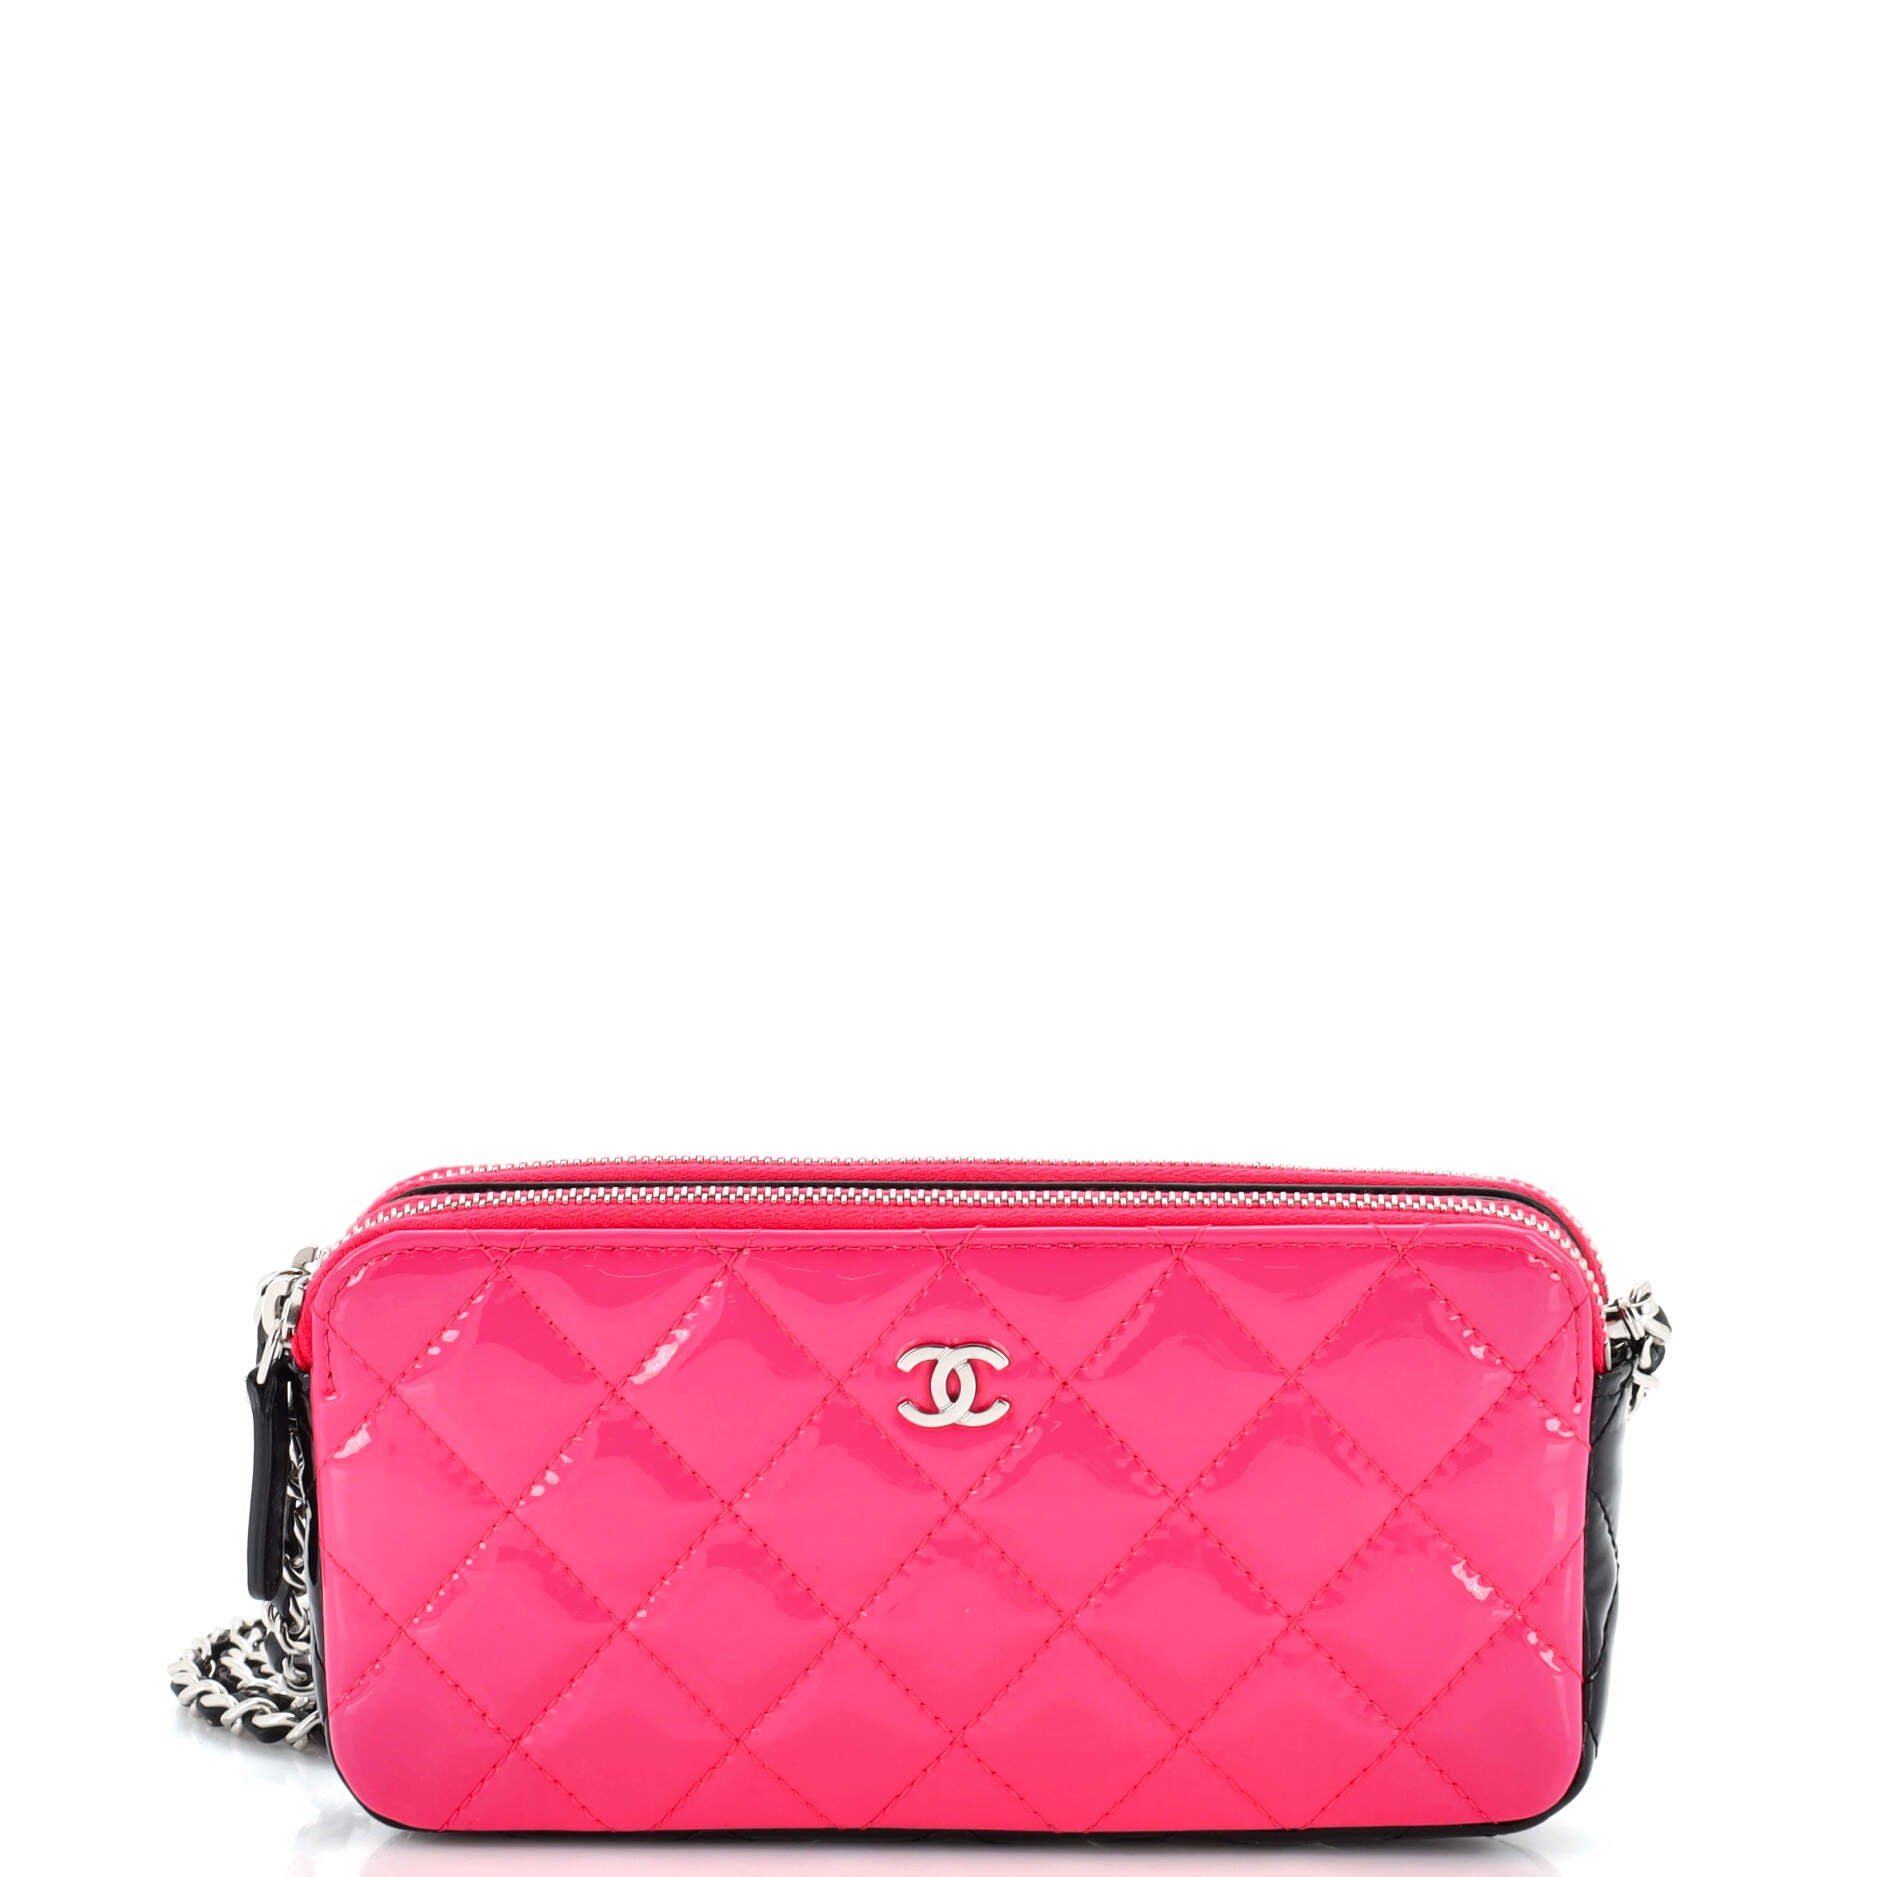 Double Zip Clutch with Chain Quilted Patent